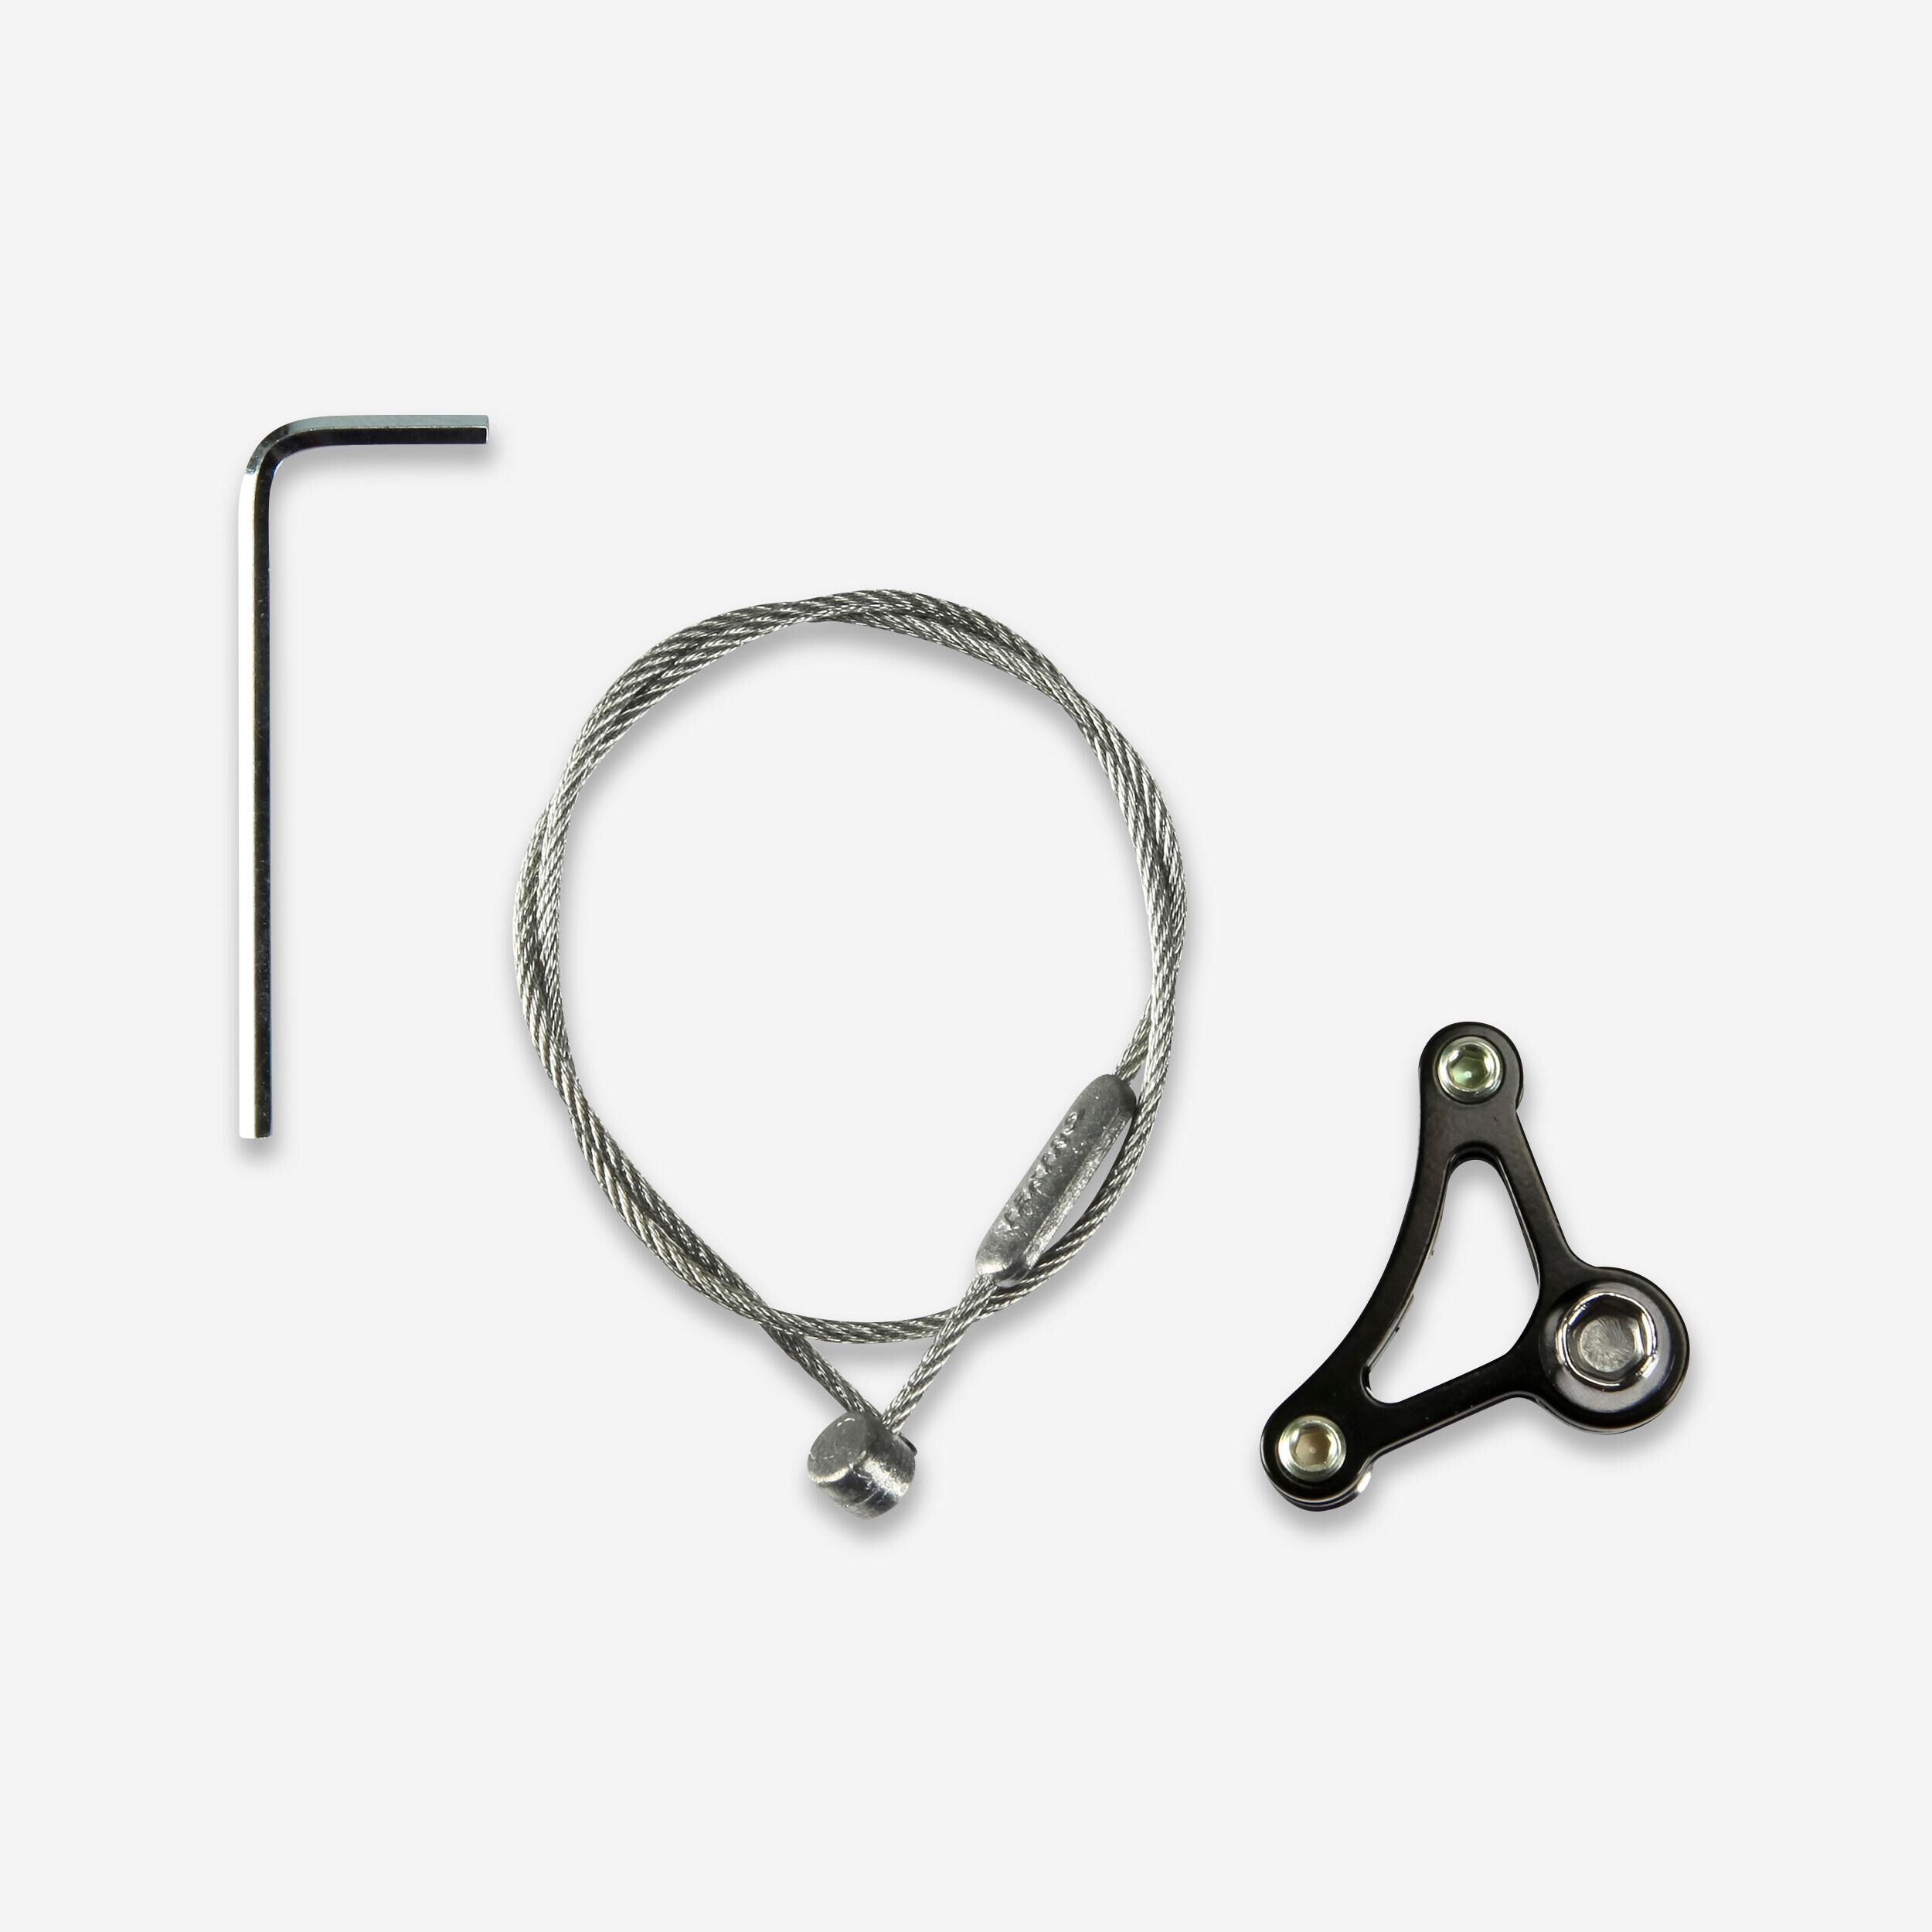 DECATHLON Cantilever Cable and Hanger